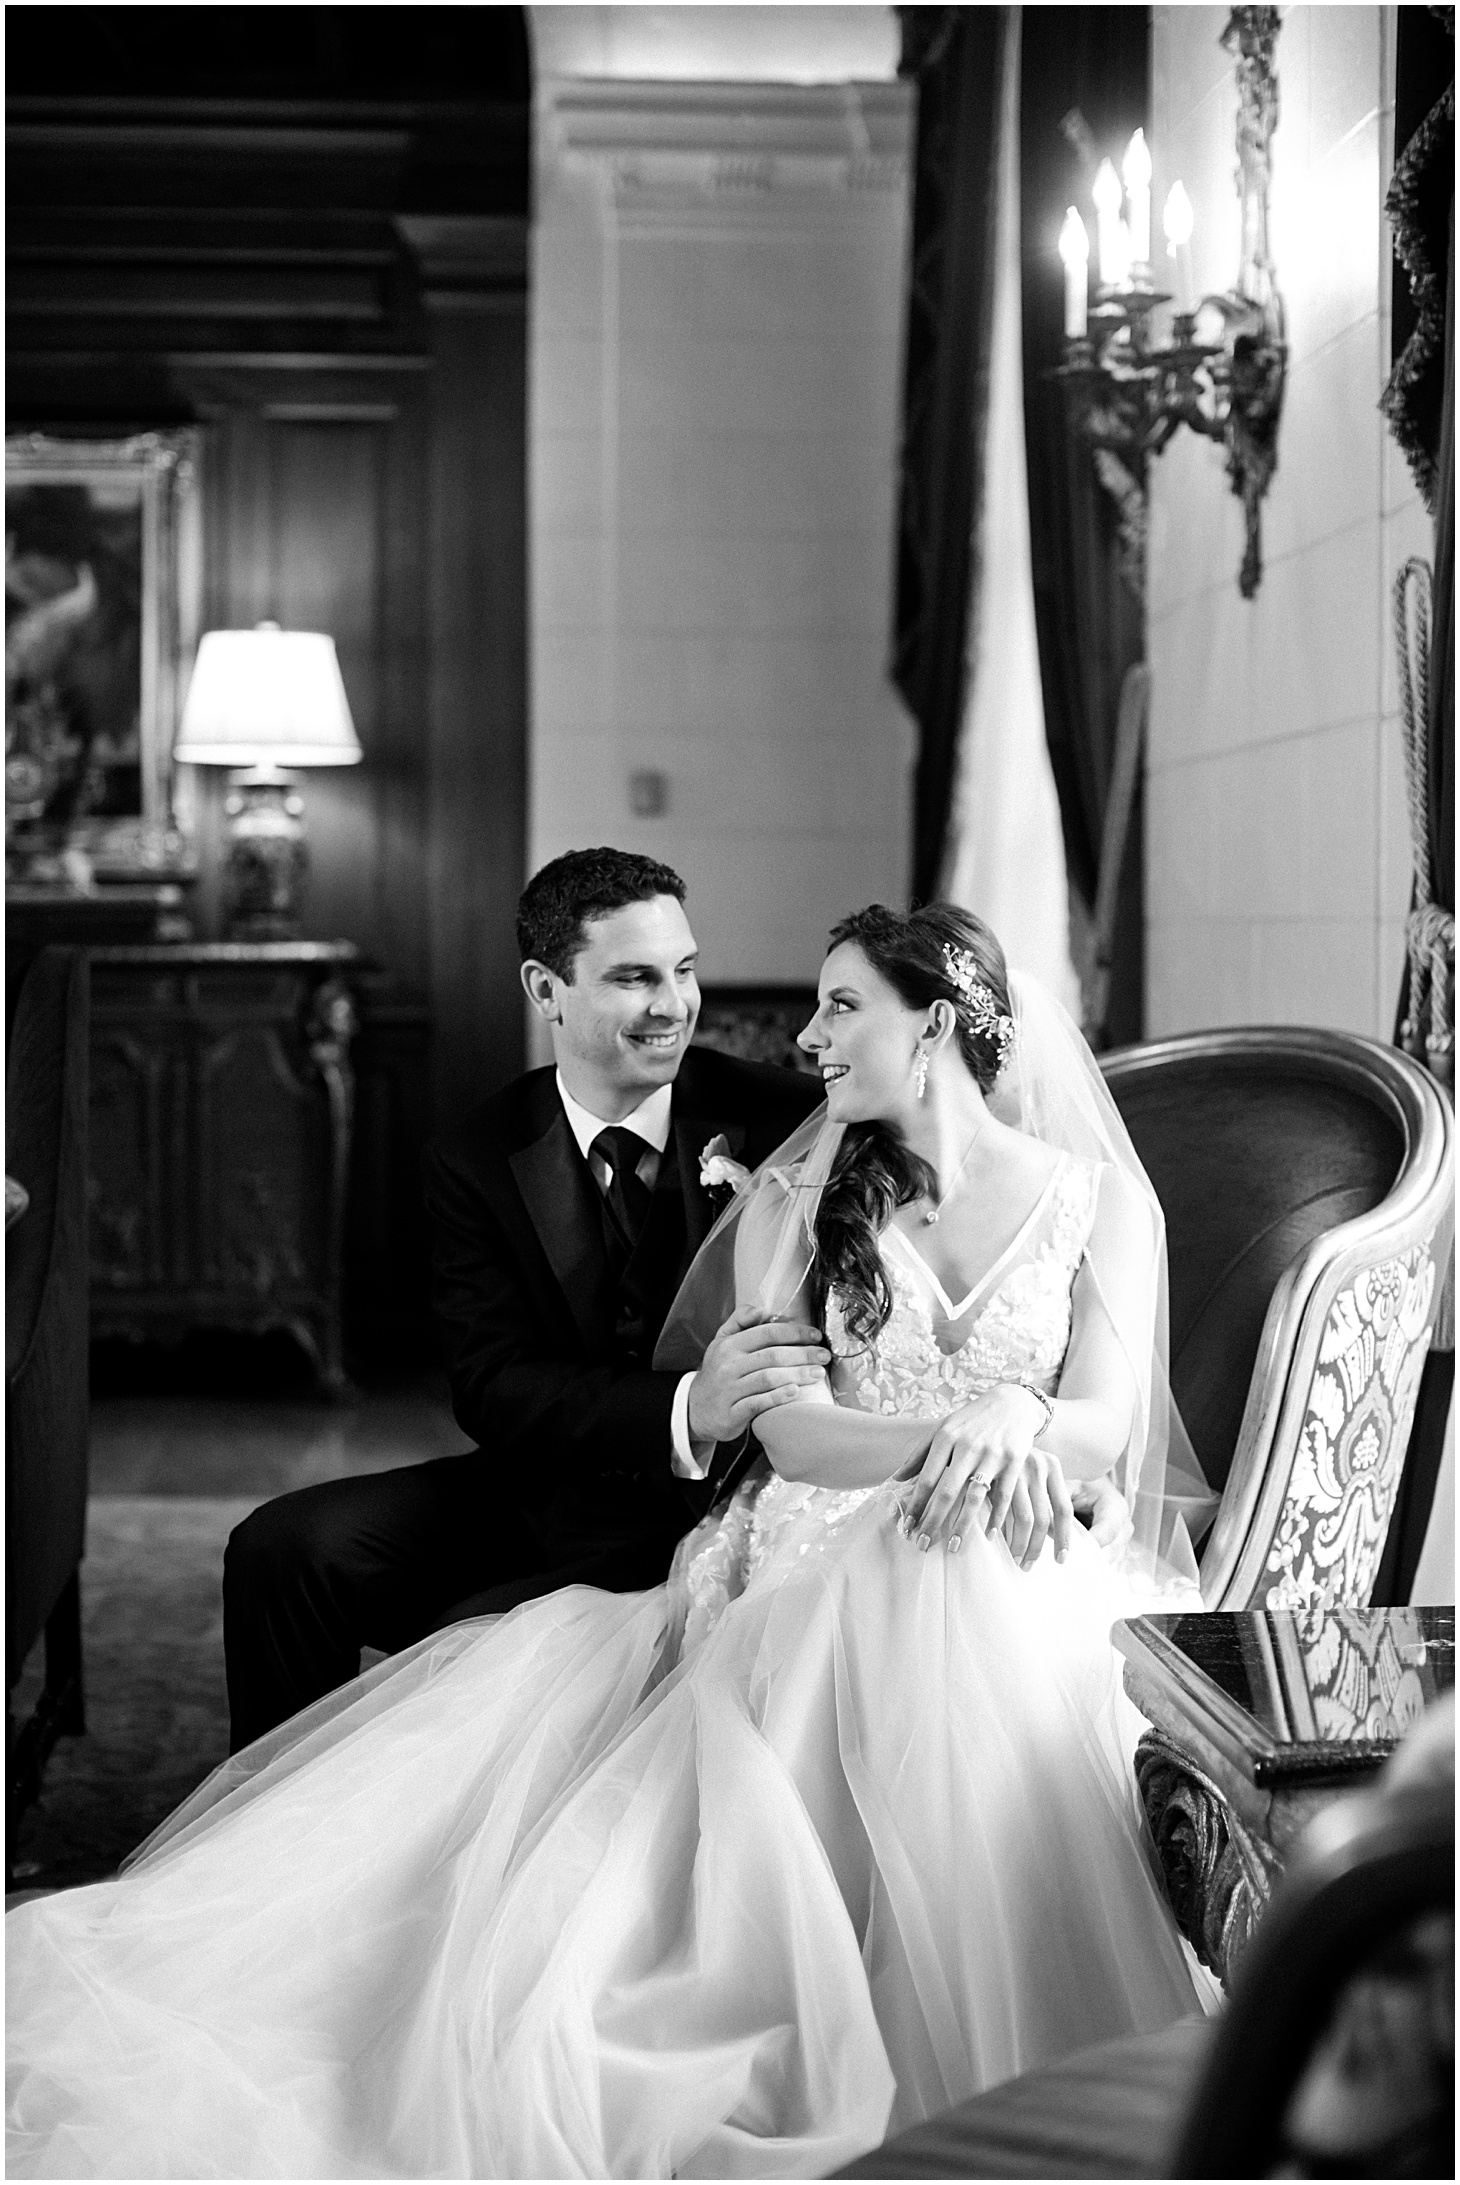 Best of Weddings - 2015 & 2016 (pt two) by Sarah Bradshaw